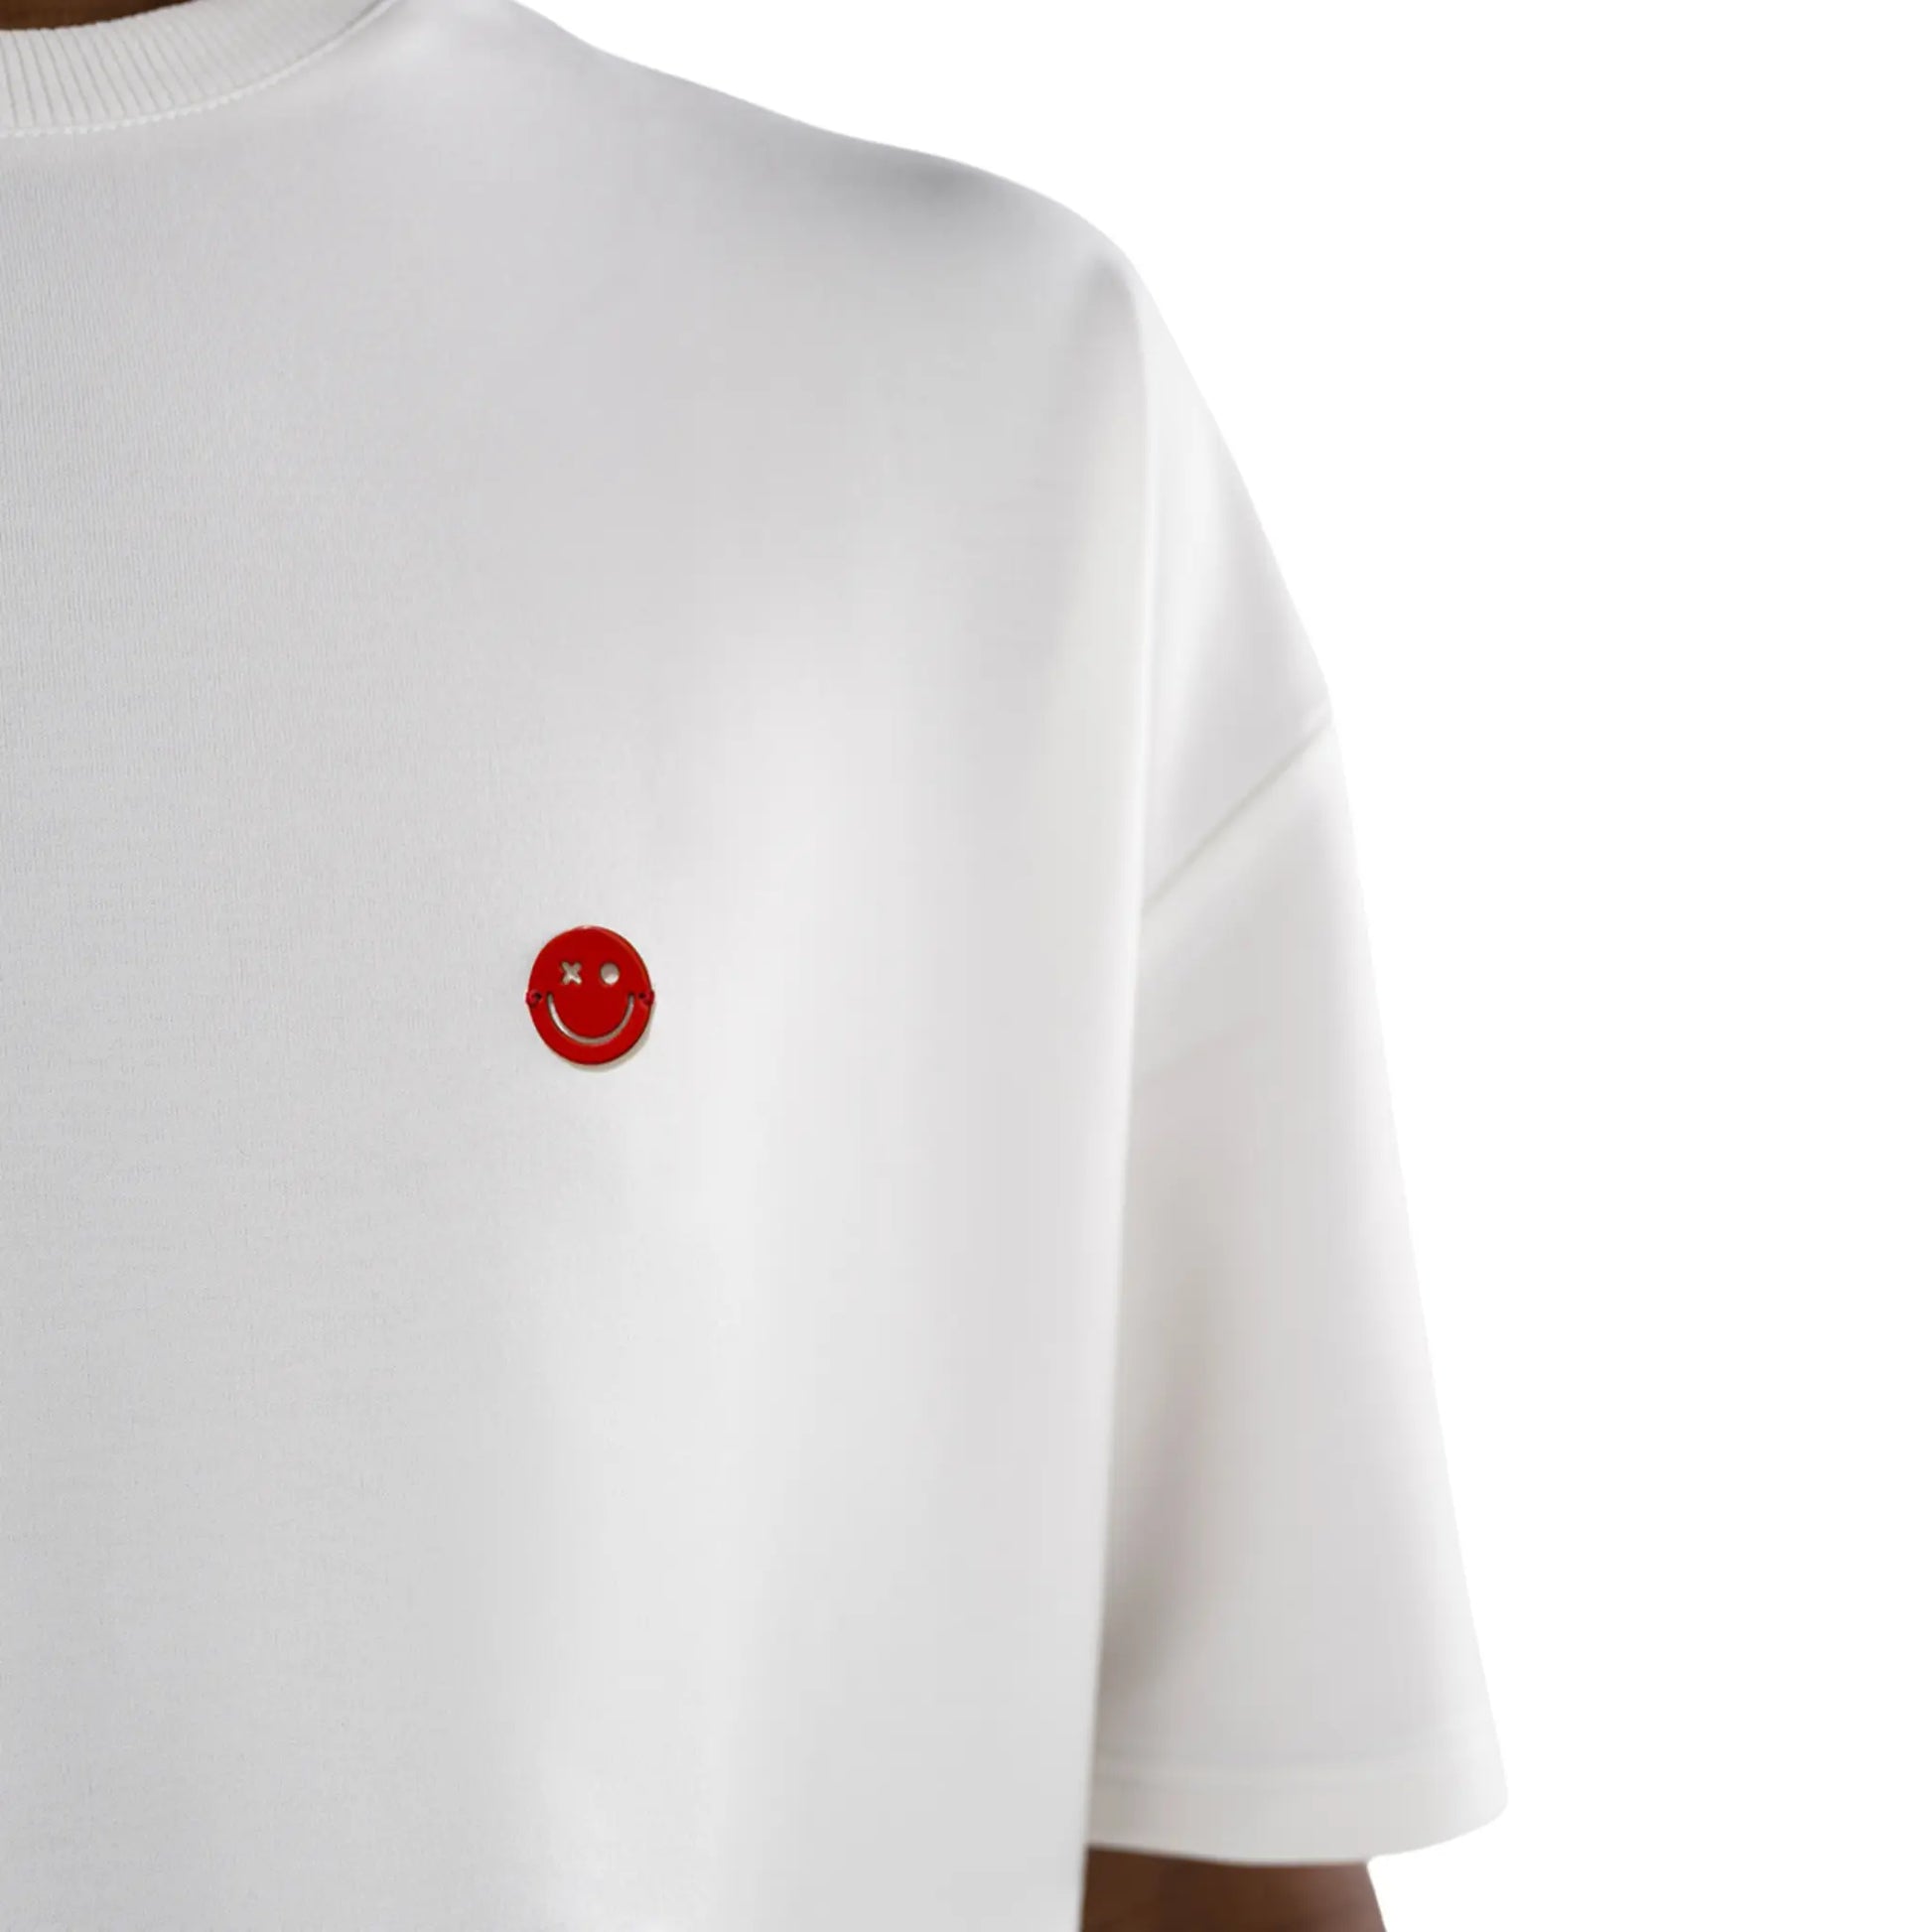 Oversized T-shirt White Love More close-up on red smiley logo